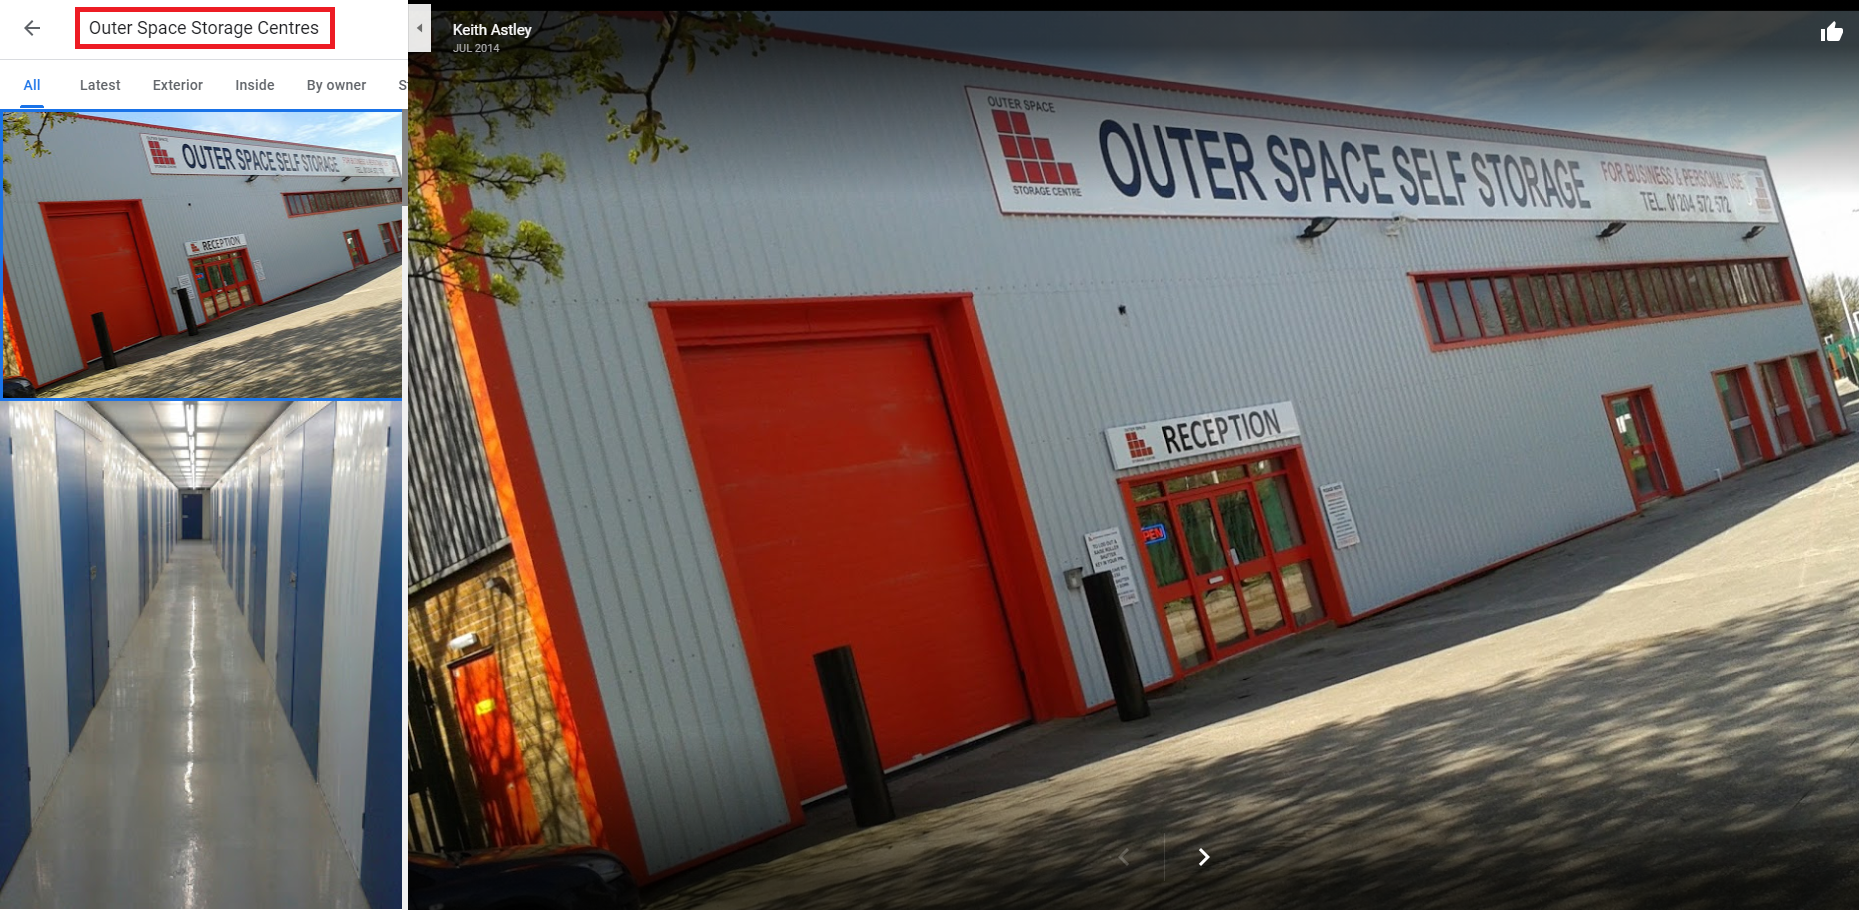 outer space storage centers uk 2